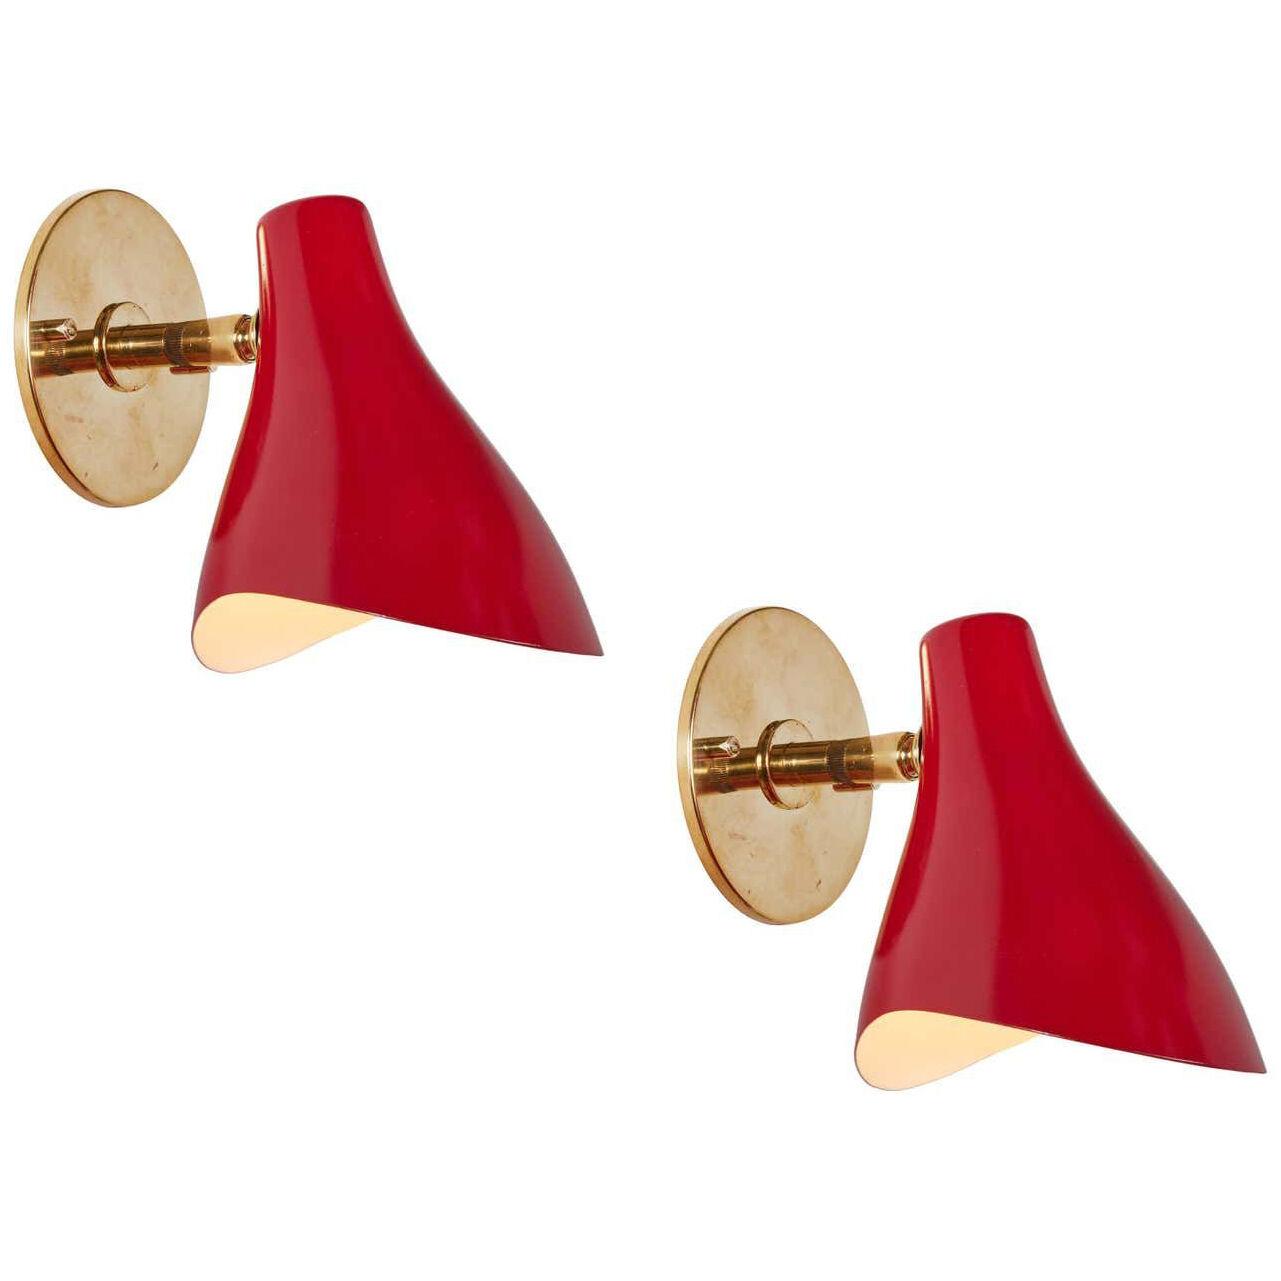 Pair of Gino Sarfatti Model #10 Sconces in Red for Arteluce